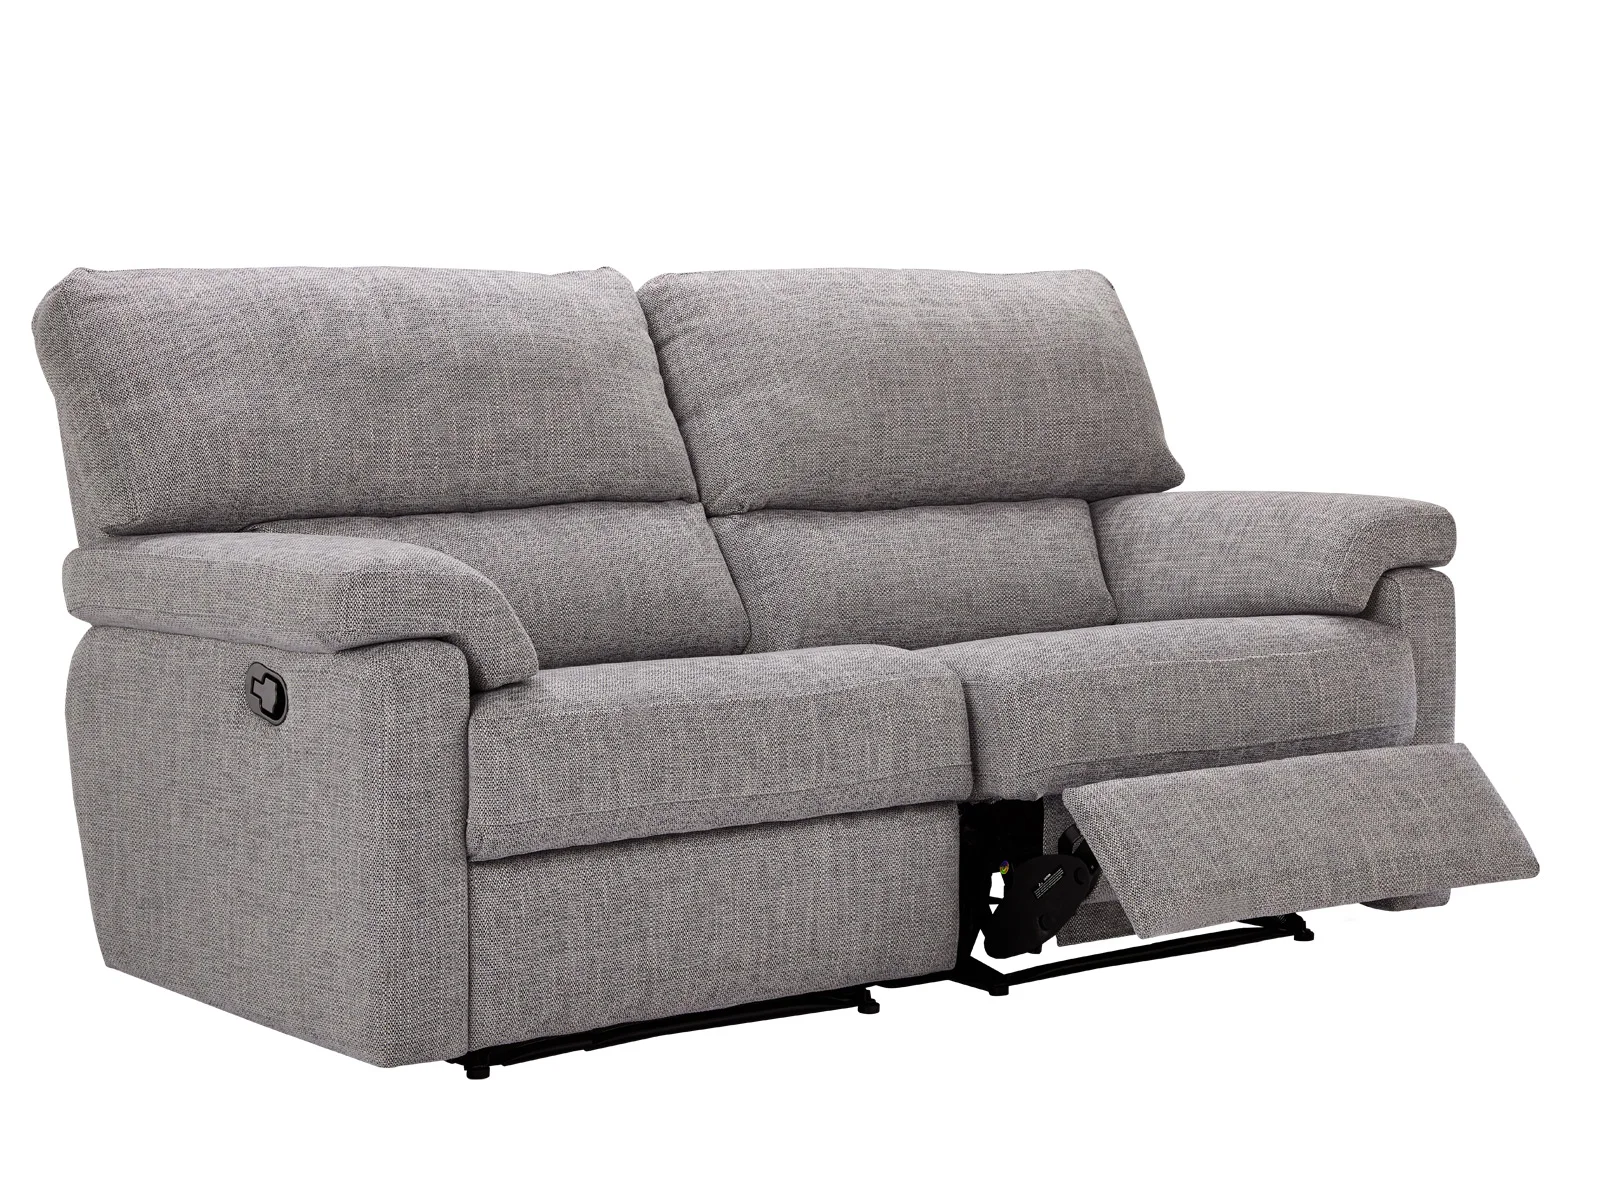 3 Seater Sofa Manual Double Recliner